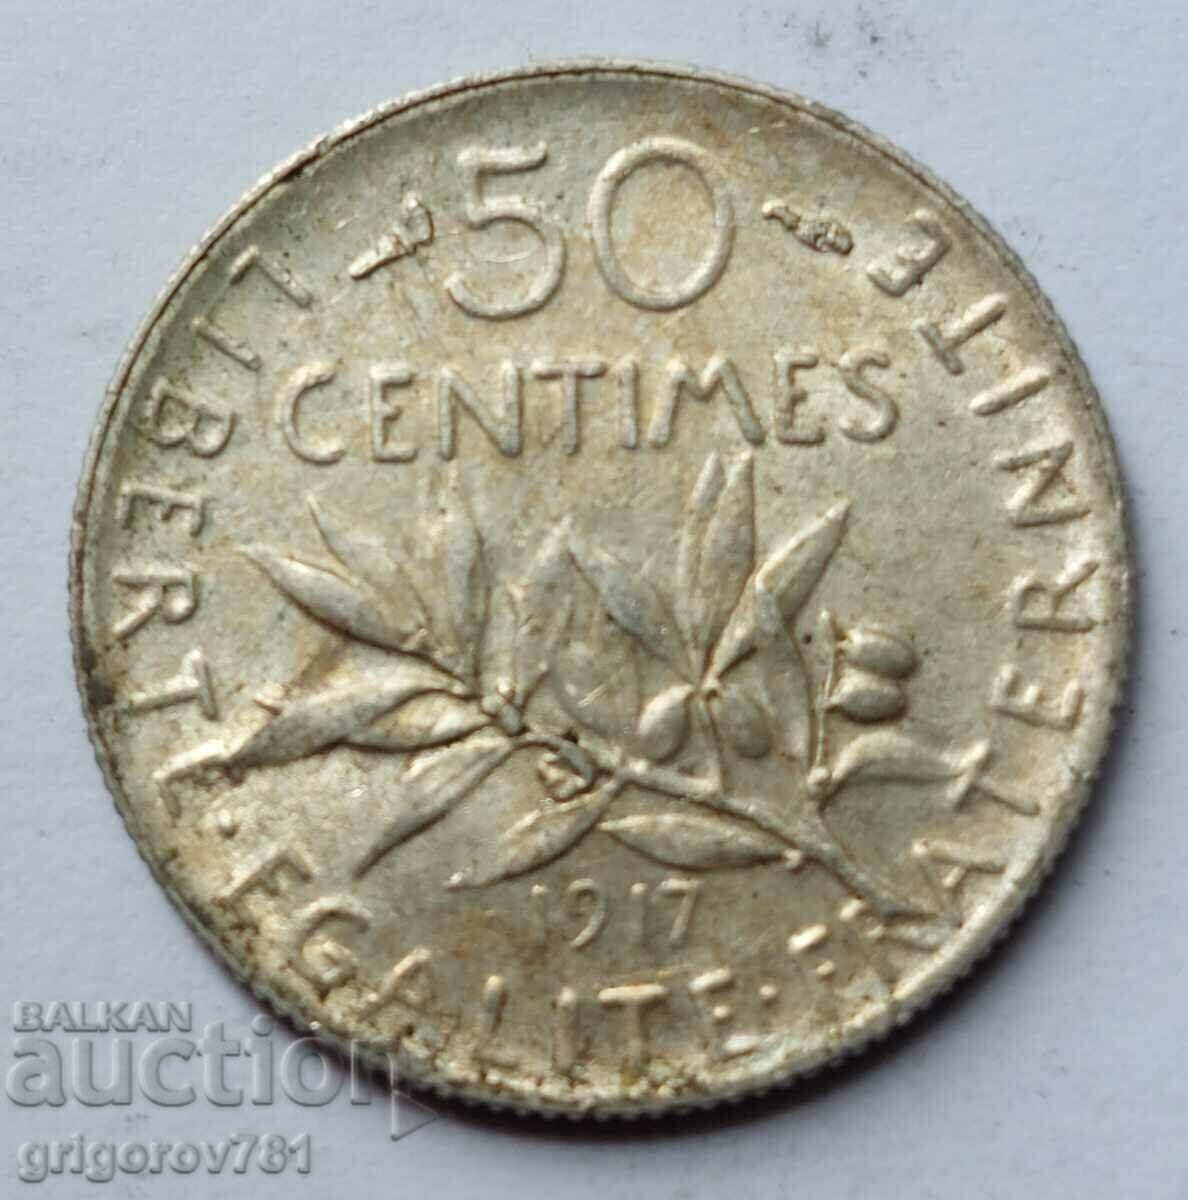 50 centimes silver France 1917 - silver coin №12